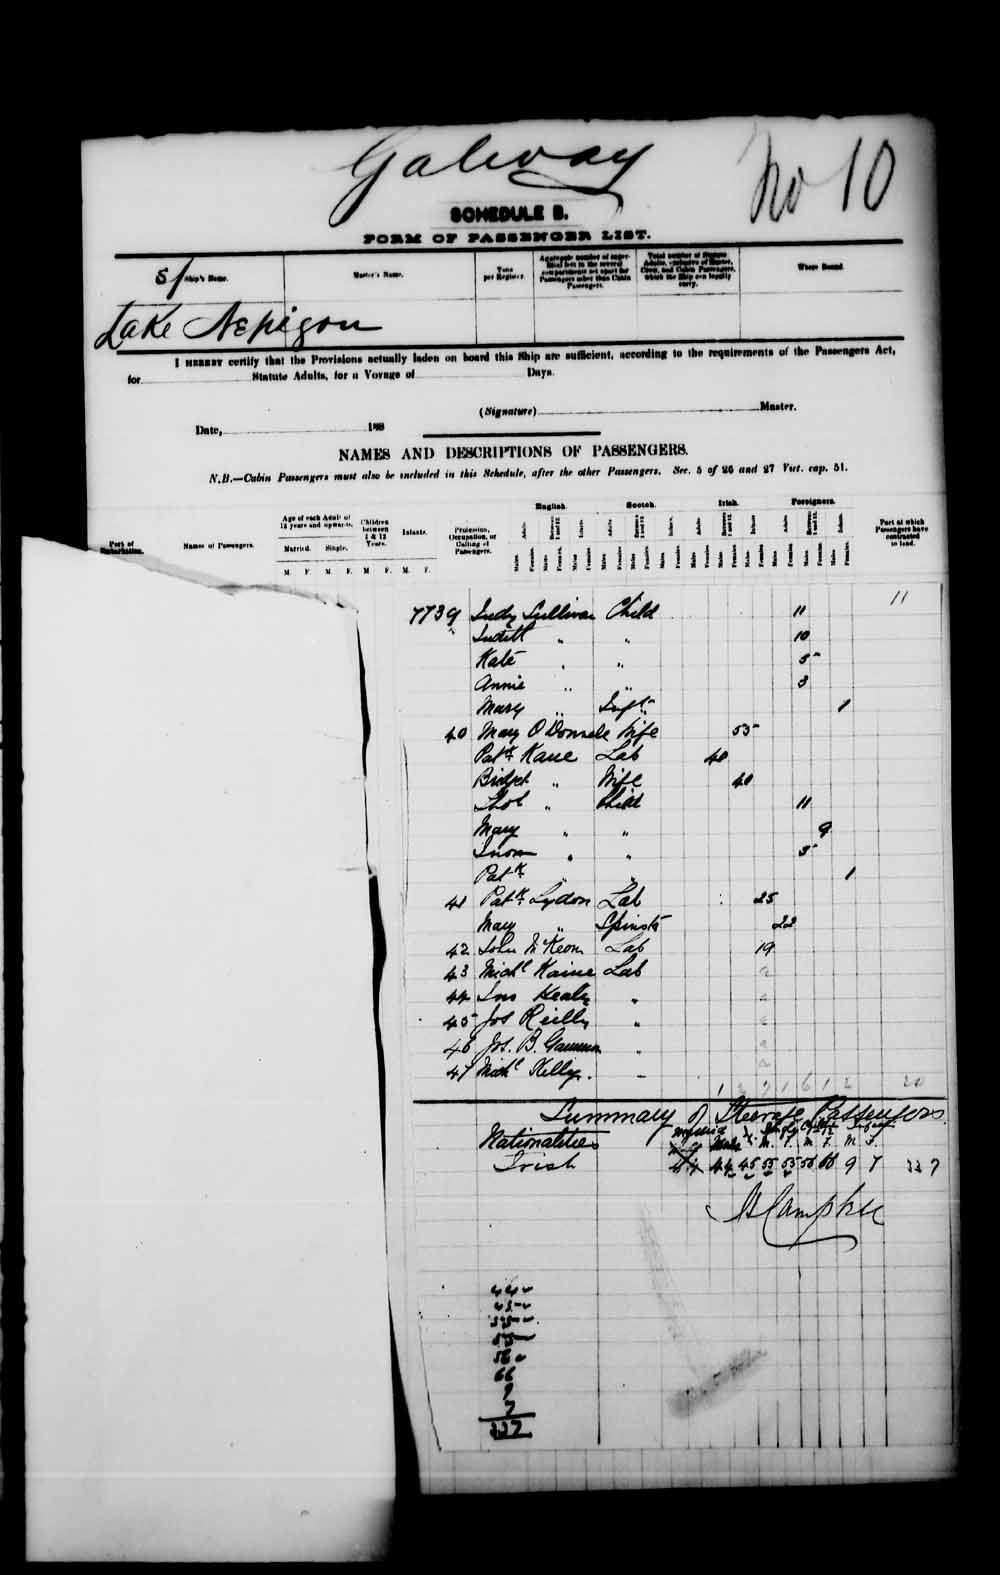 Digitized page of Passenger Lists for Image No.: e003541467